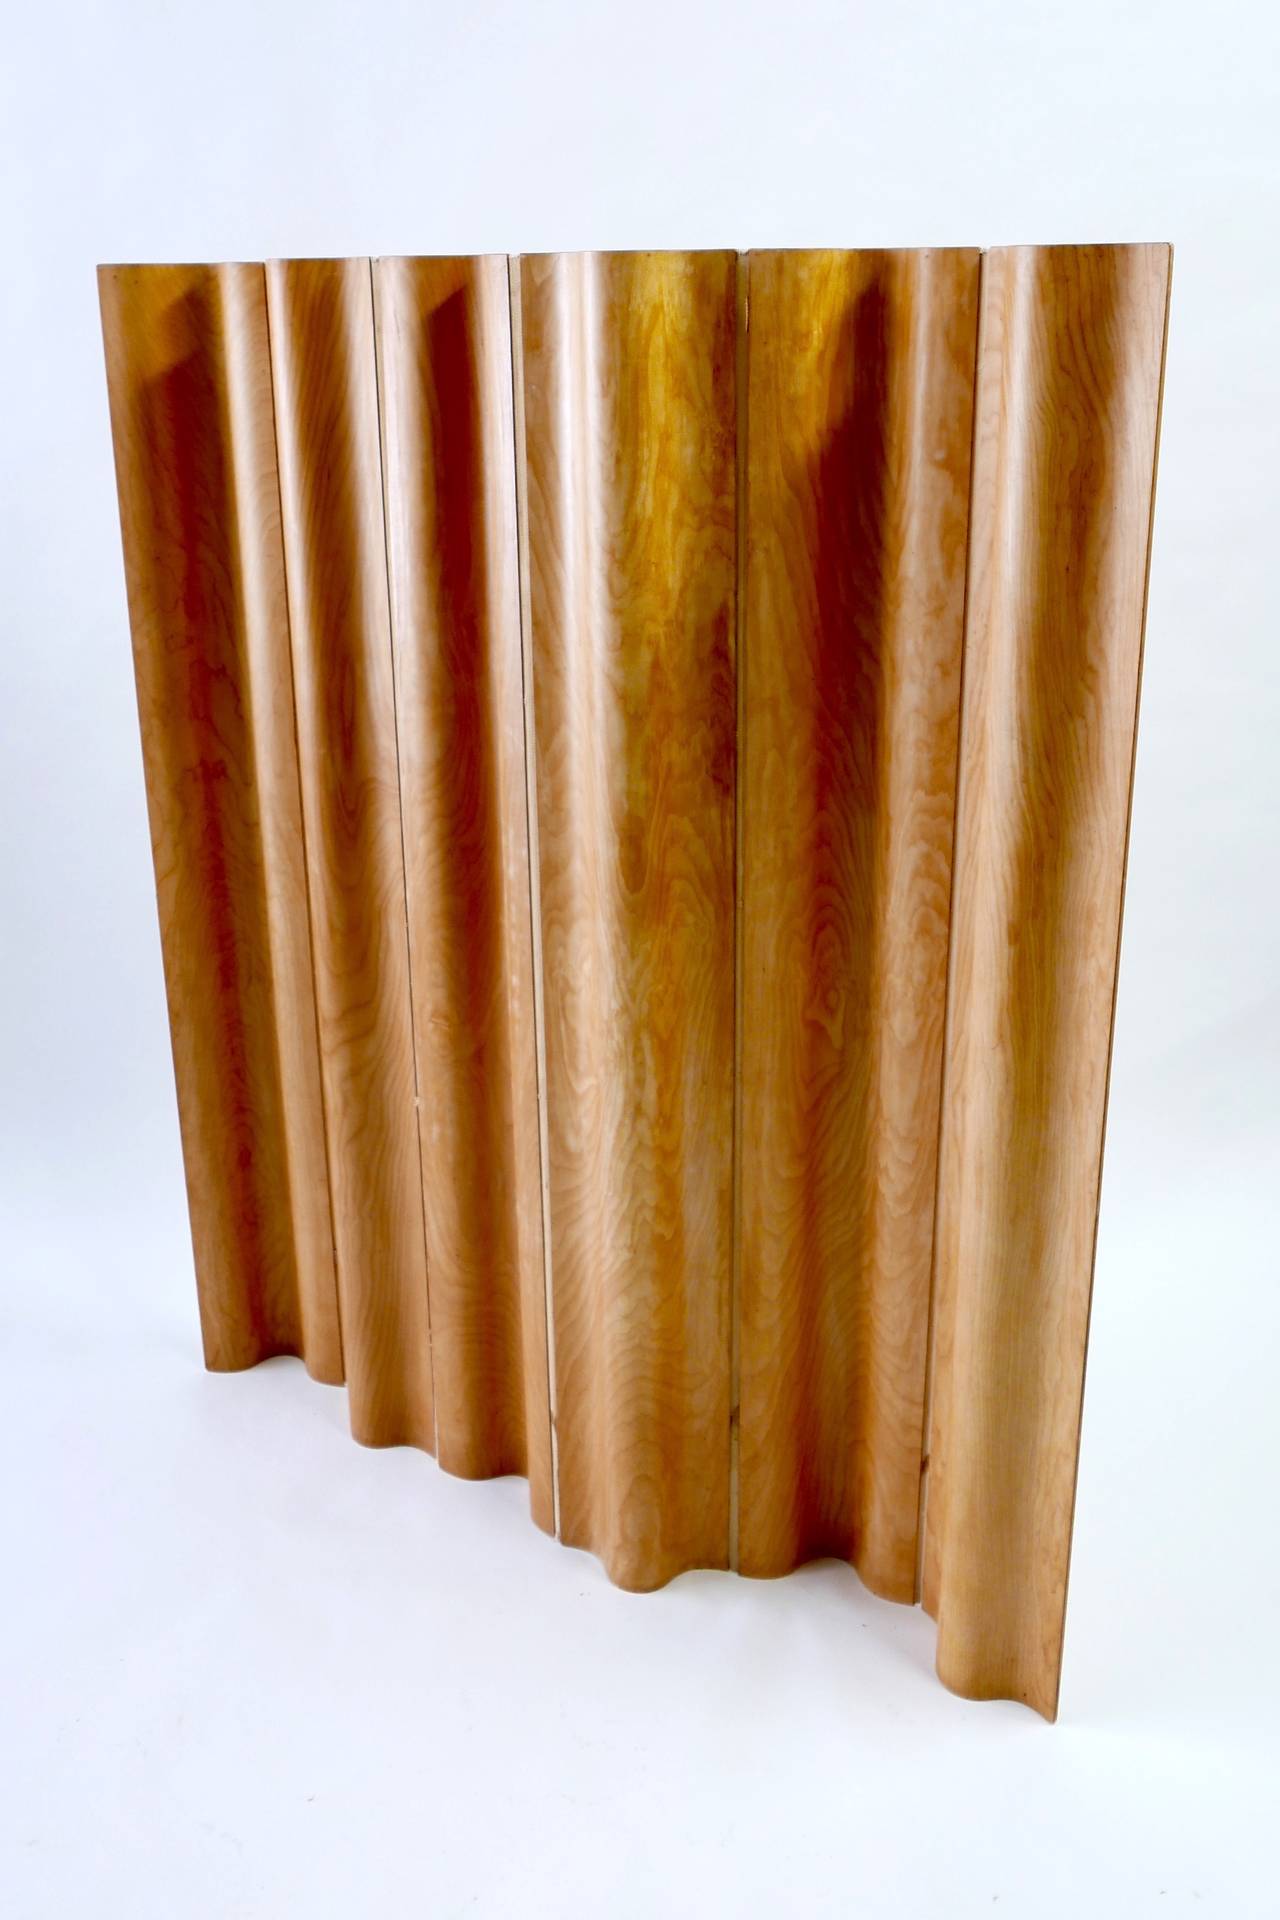 A six-panel molded plywood-folding screen in birch veneer by Herman Miller.
This vintage example comes from the original owner who purchased it in 1950s from the Museum of Modern Art.